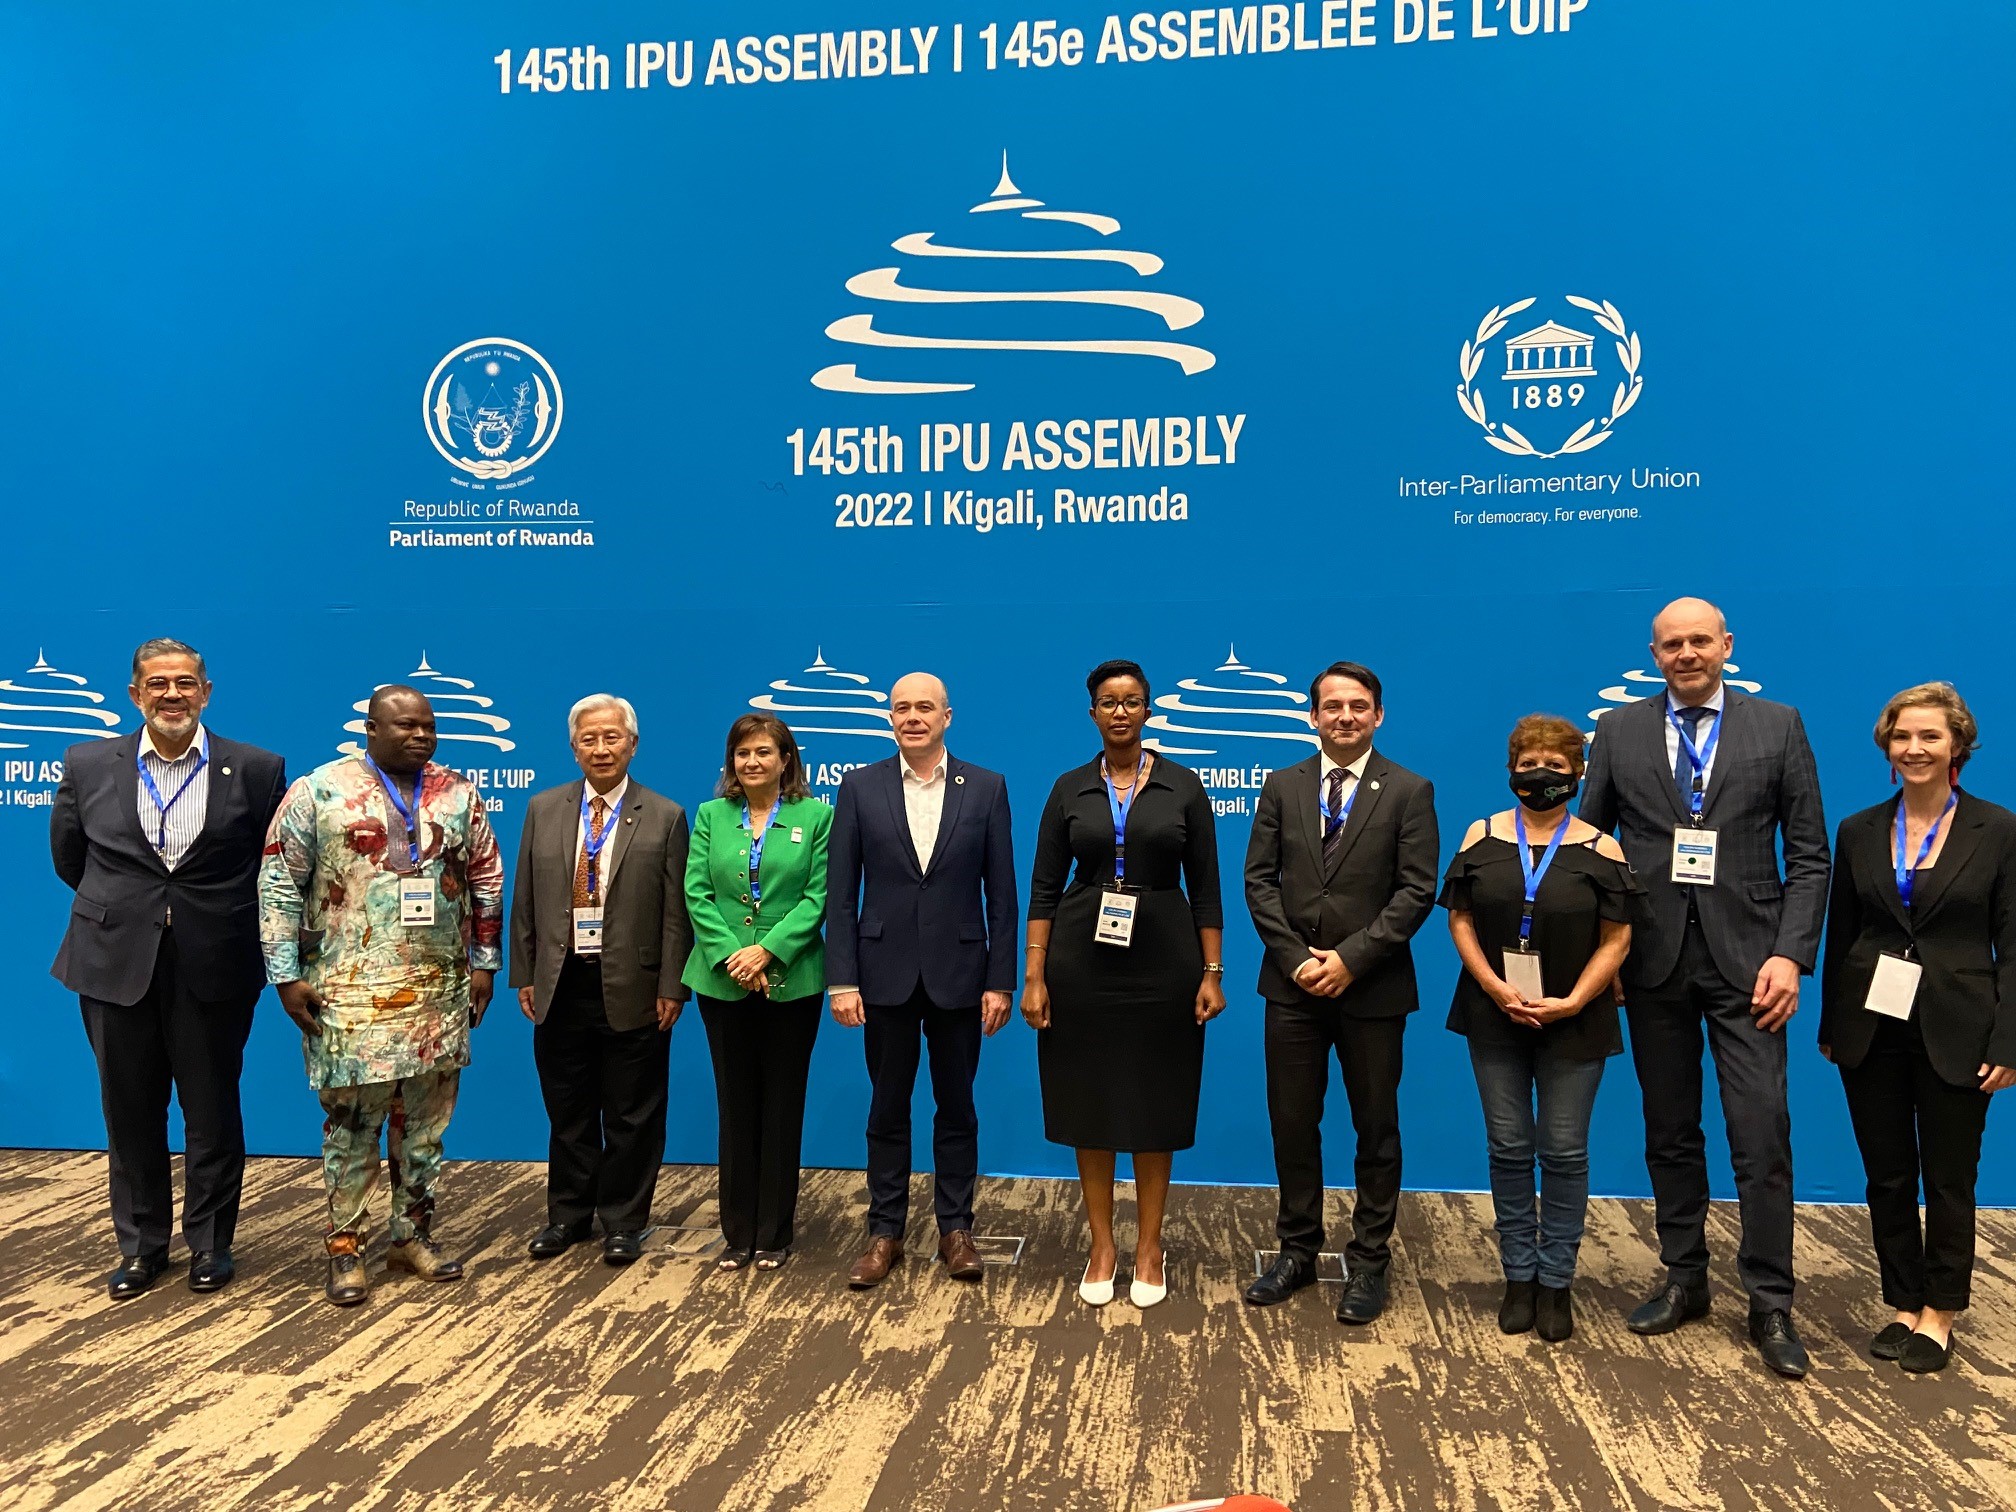 145th IPU Assembly Arbeitsgruppe Science and Technologie